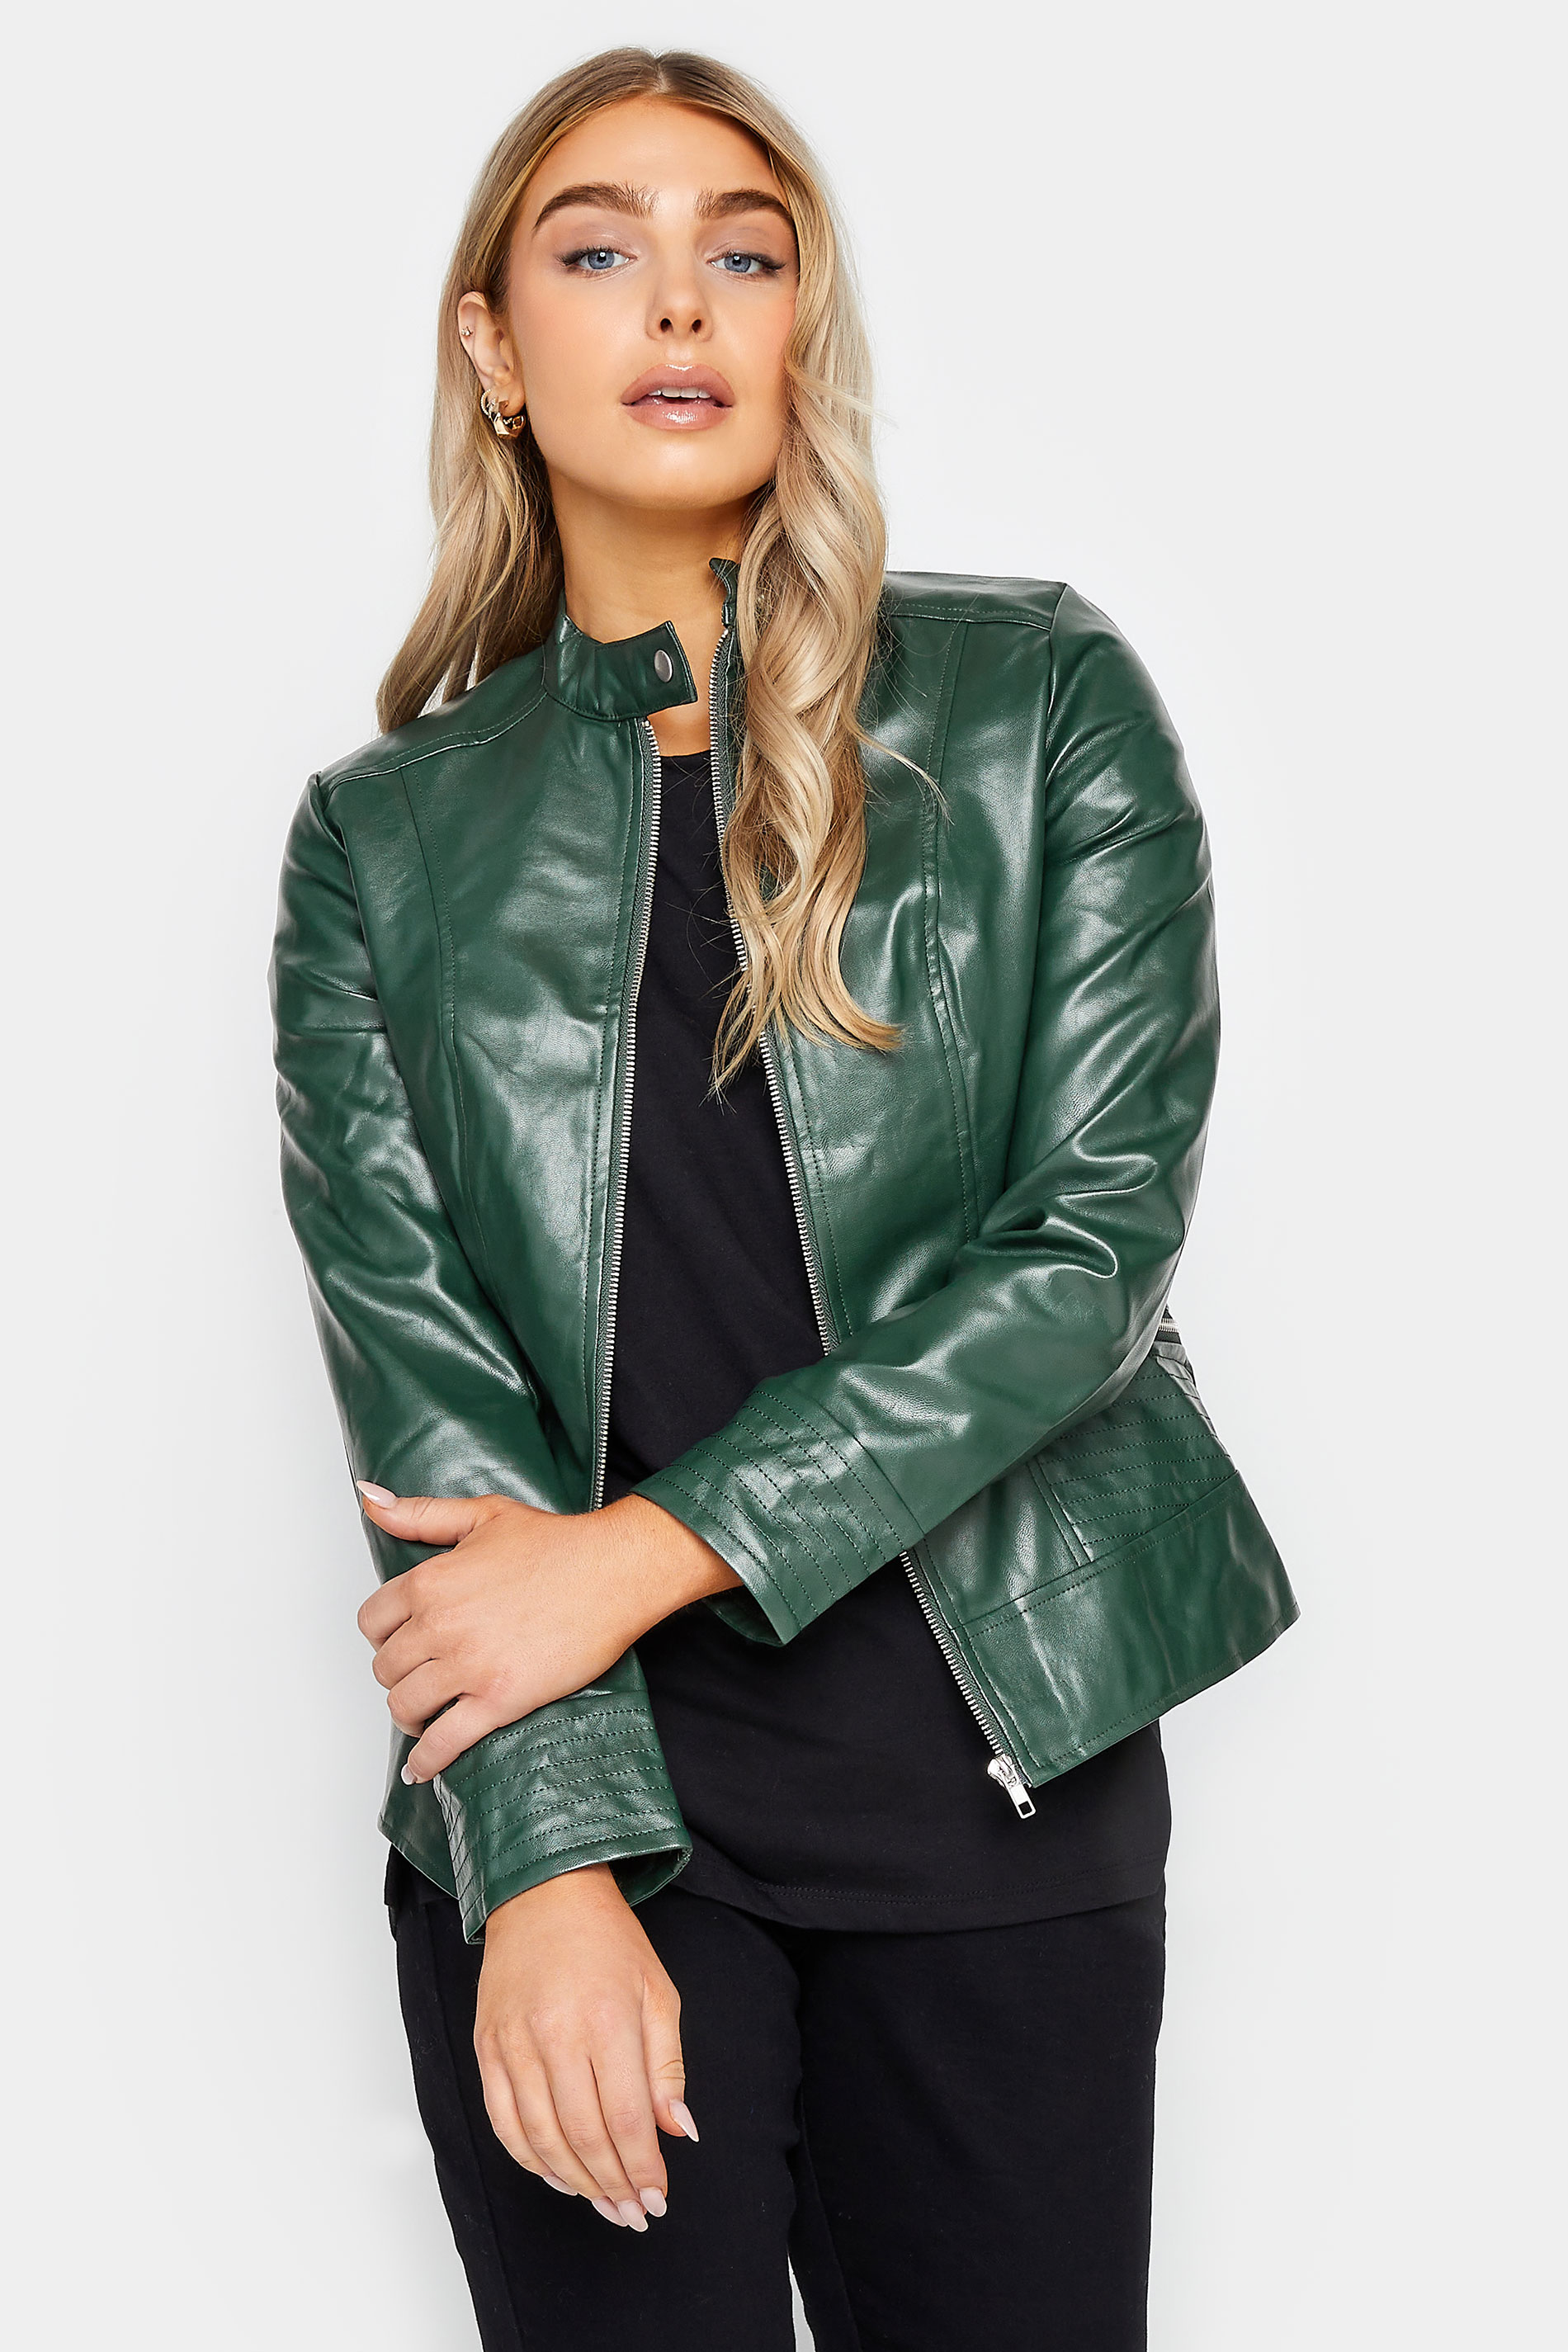 M&Co Dark Green Faux Leather Jacket | M&Co